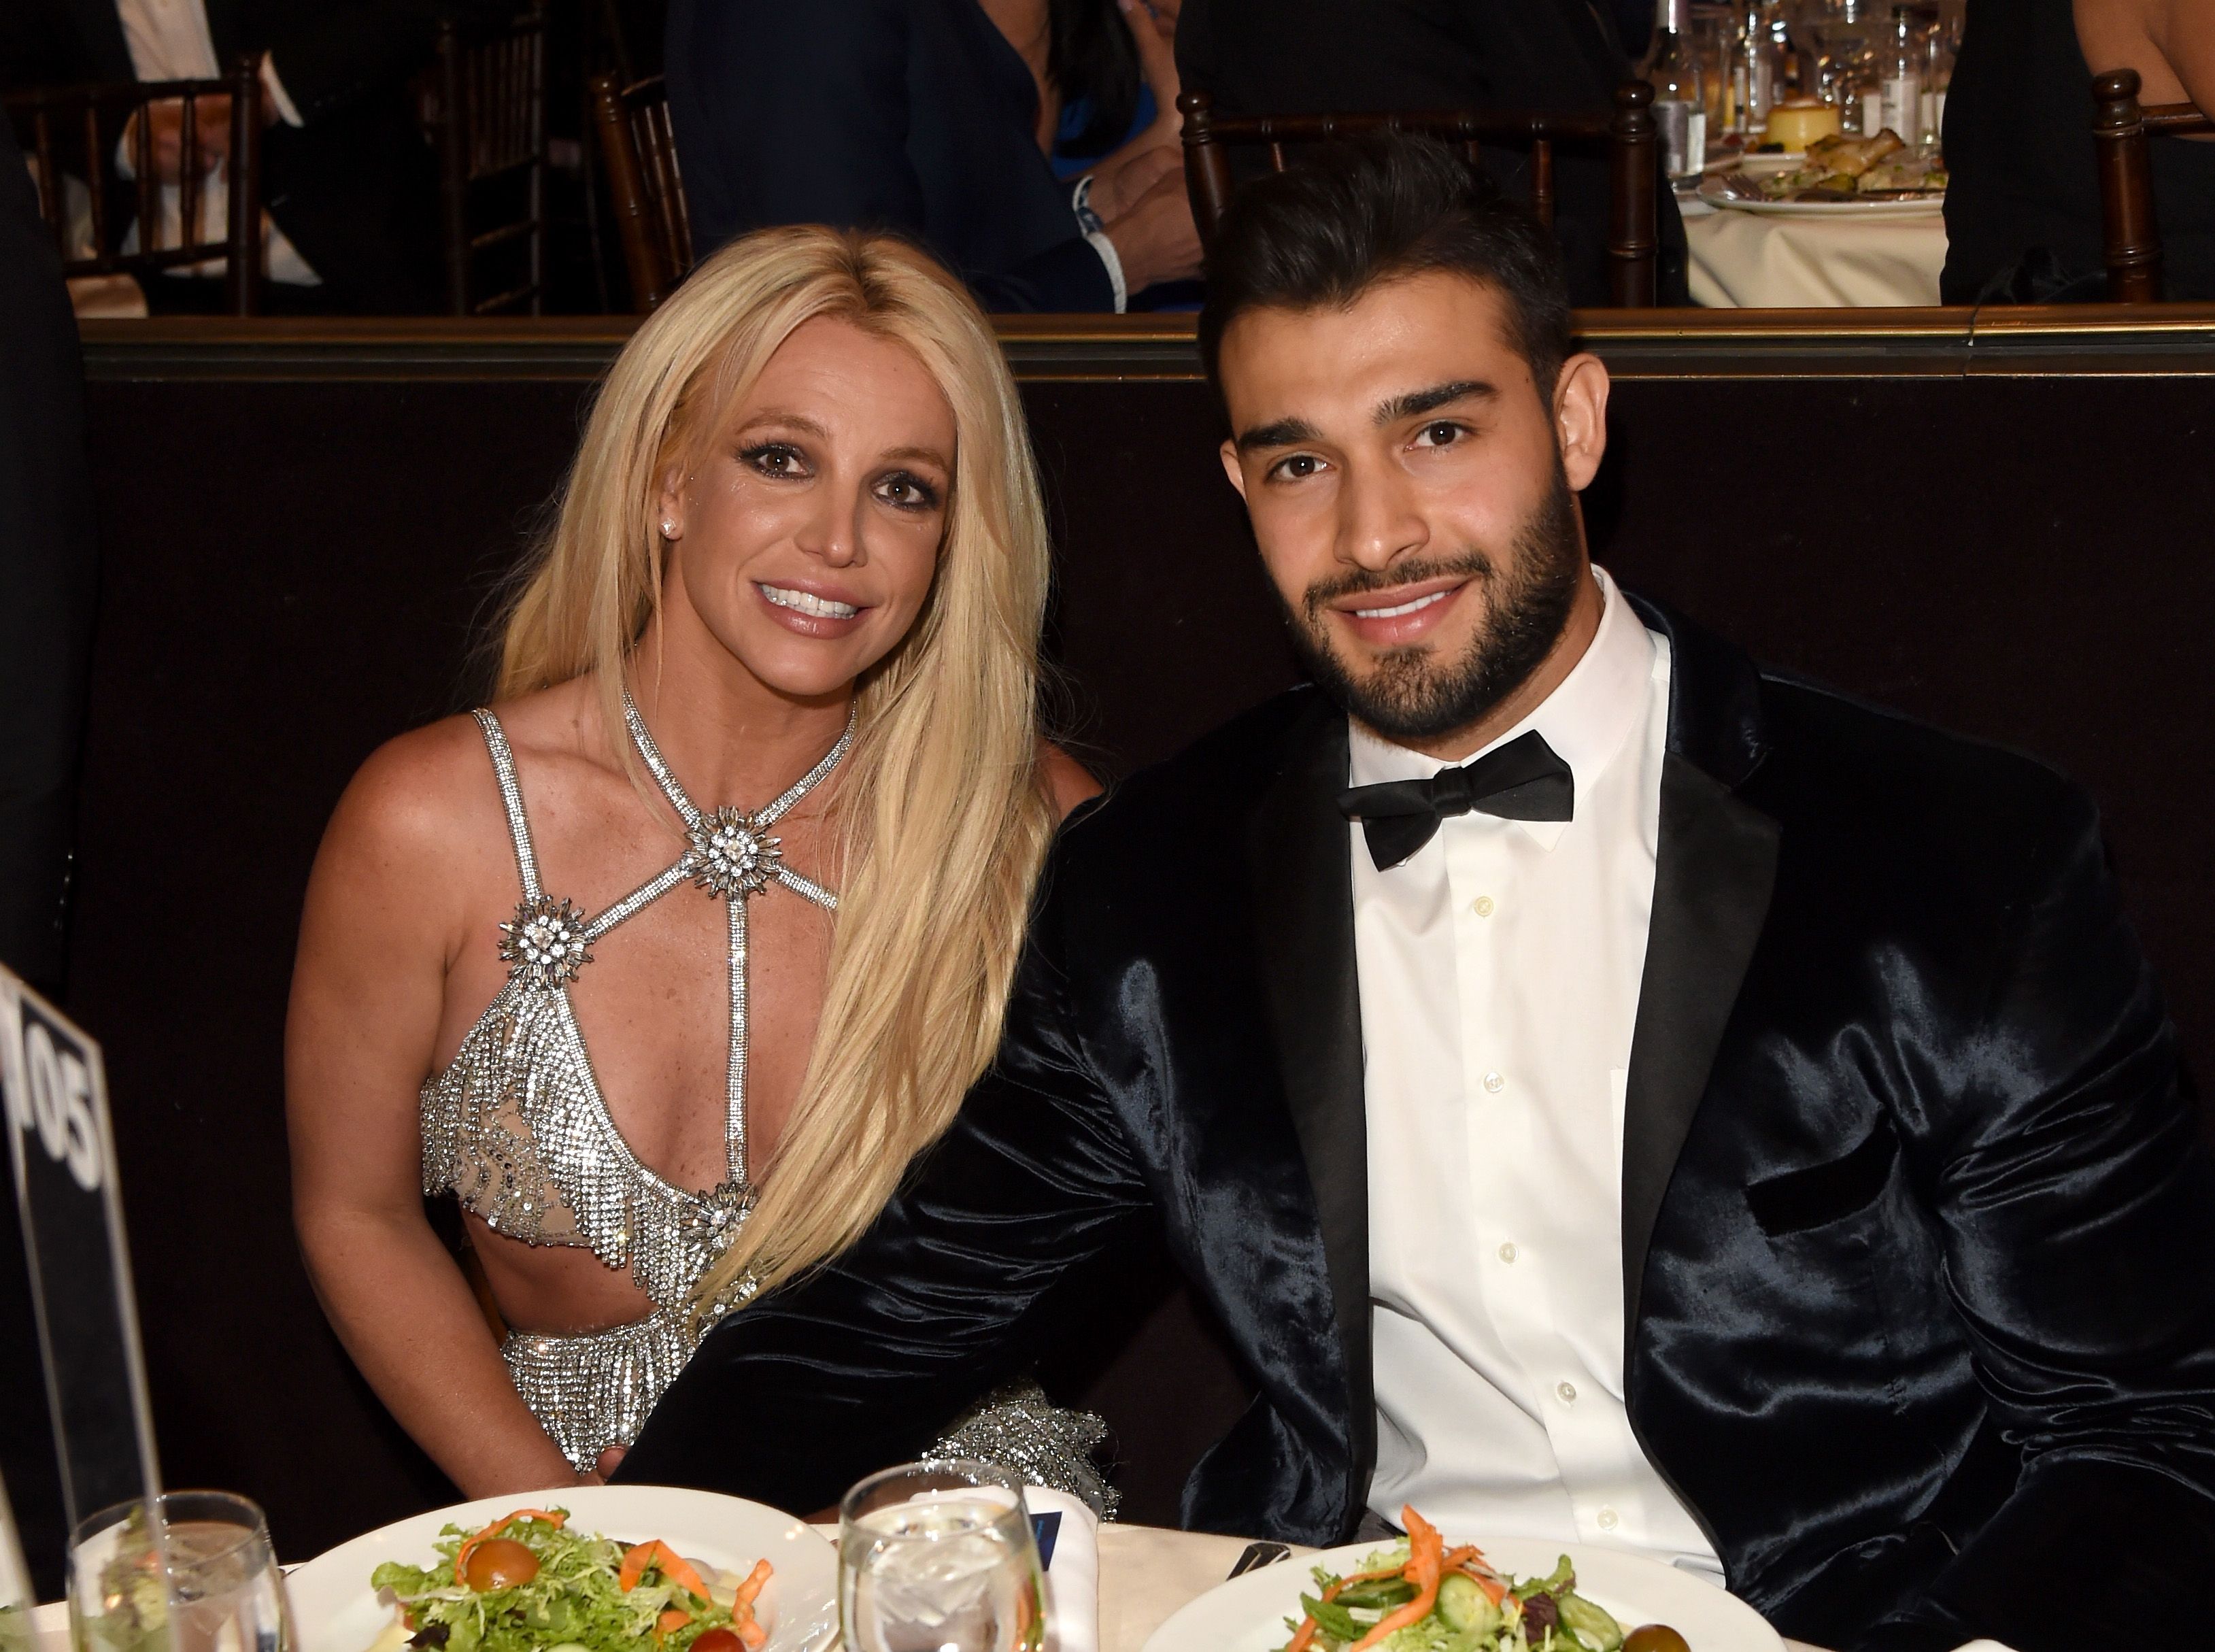 Honoree Britney Spears (L) and Sam Asghari at the 29th Annual GLAAD Media Awards at The Beverly Hilton Hotel on April 12, 2018 | Photo: Getty Images